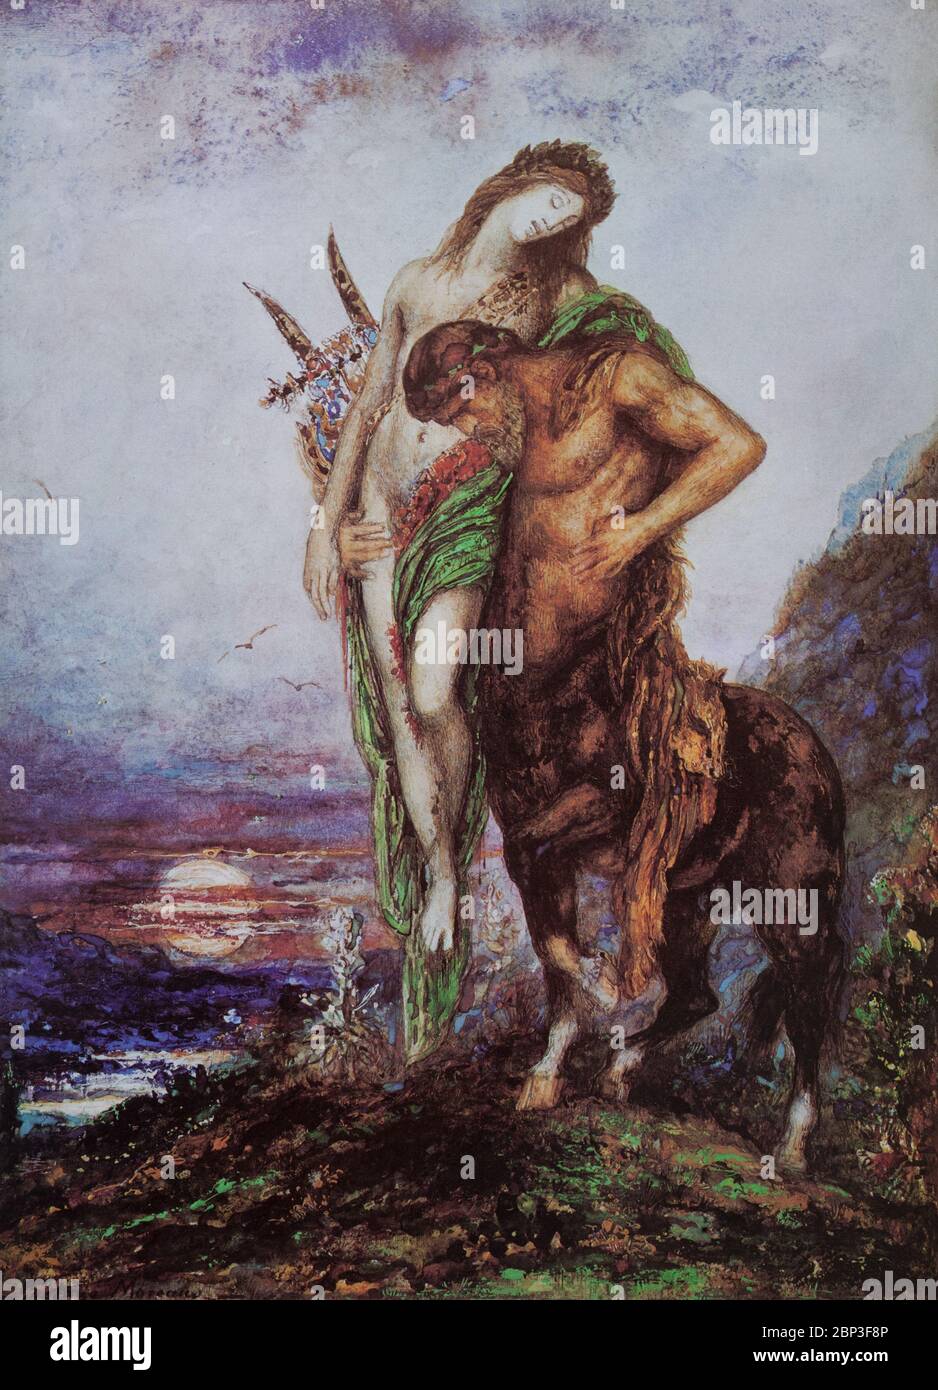 'The Dead Poet Borne by a Centaur', by  Gustave Moreau (1826-1898), a major figure in the French Symbolist movement, whose main emphasis was the illustration of biblical and mythological figures. During his lifetime, Moreau produced more than 8,000 paintings, watercolors and drawings influencing the next generation of Symbolists, particularly Odilon Redon and Jean Delville. Stock Photo